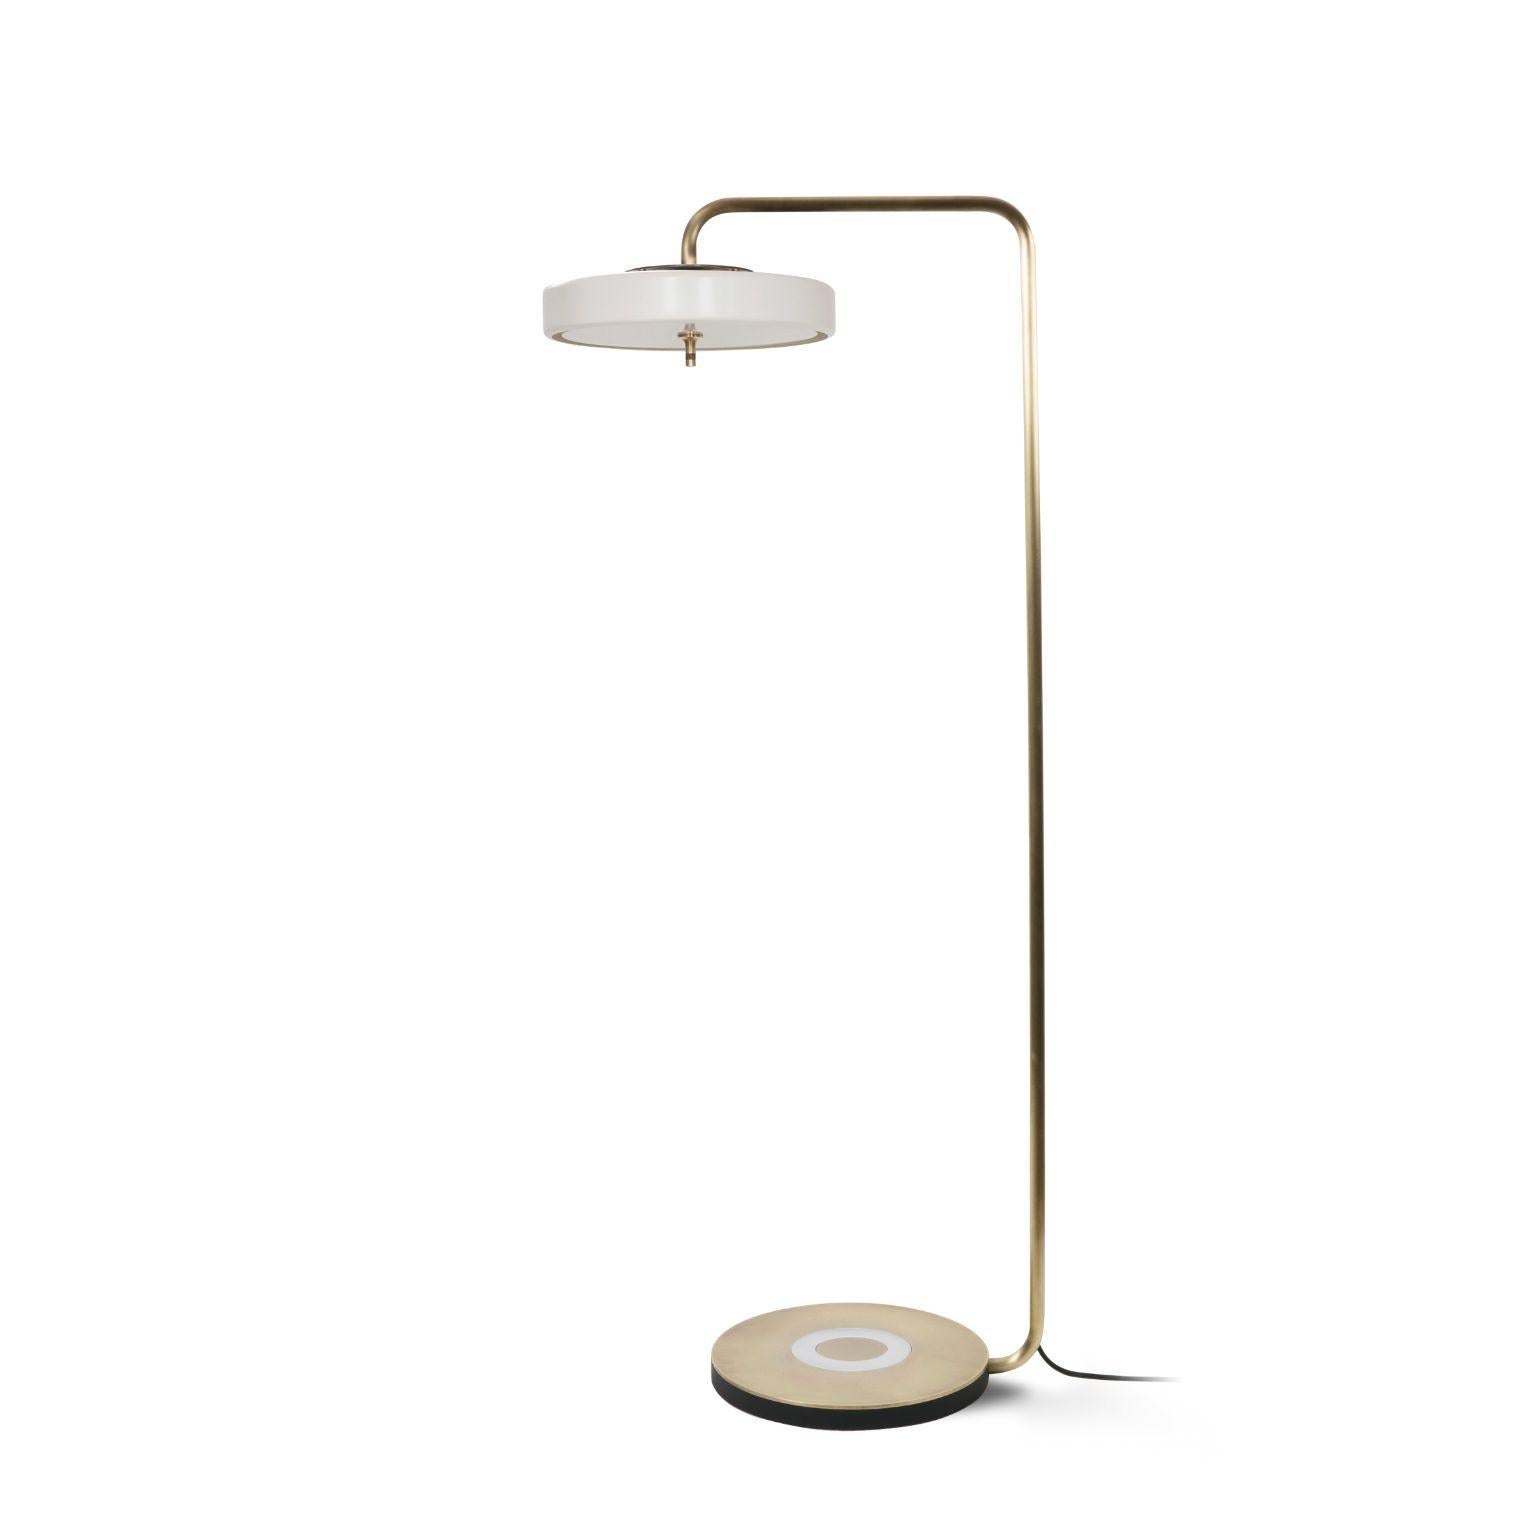 Revolve floor lamp - Brushed brass - White by Bert Frank
Dimensions: 130 x 35.4 x 9.3 cm
Materials: Brass, steel

Also Available in polished brass
When Adam Yeats and Robbie Llewellyn founded Bert Frank in 2013 it was a meeting of minds and the